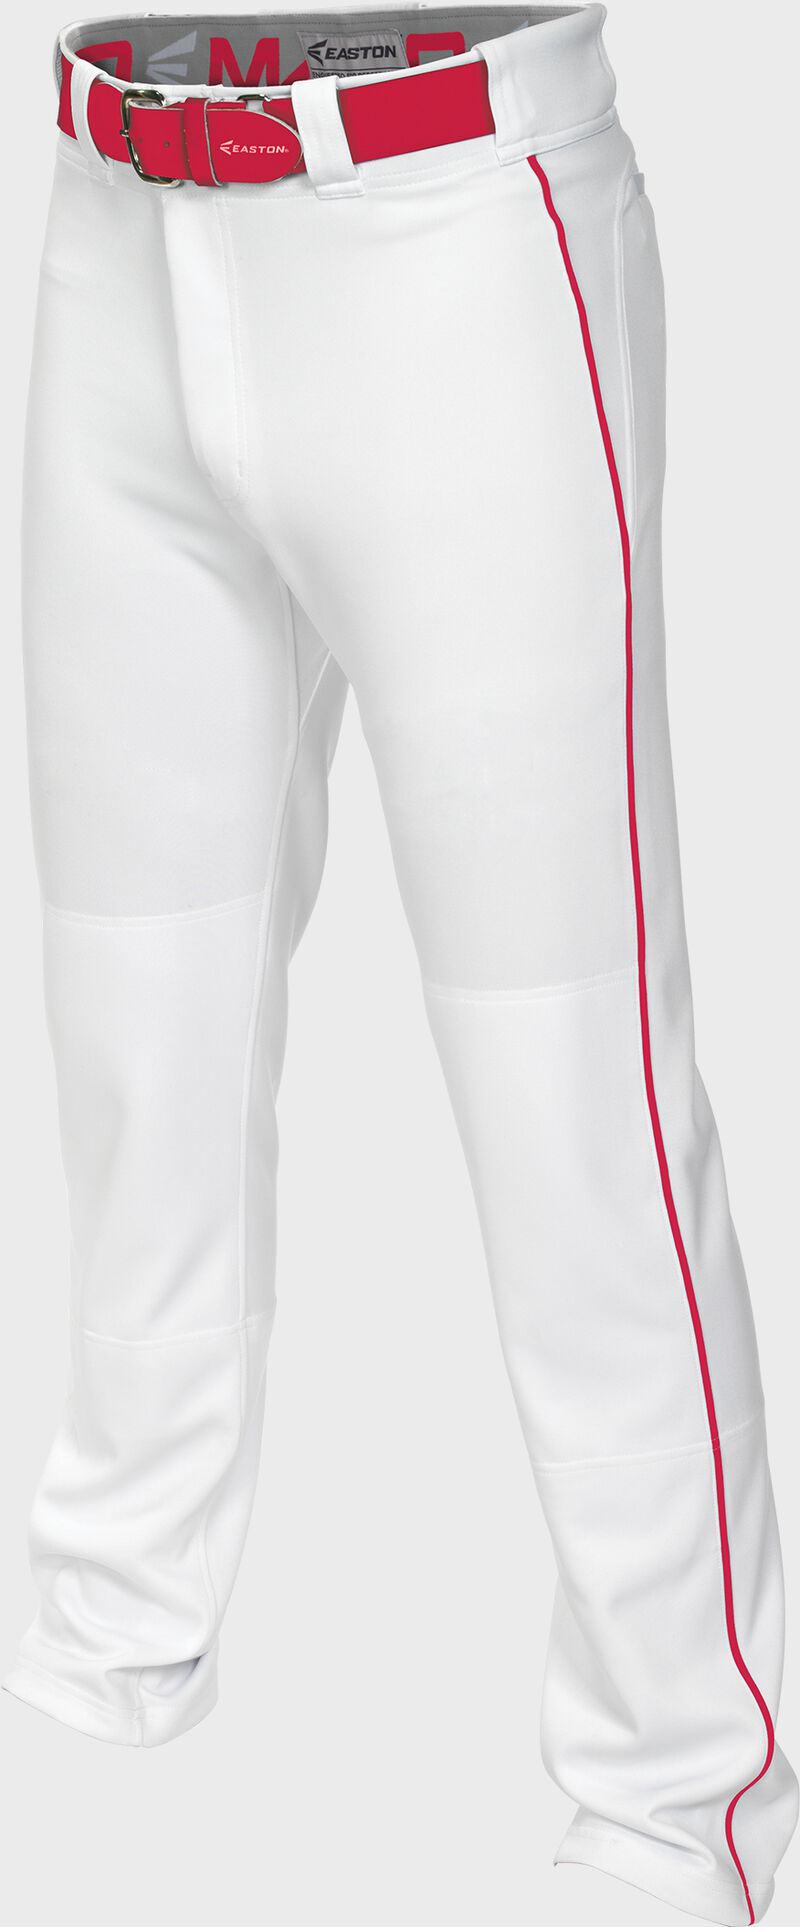 Mako 2 Pant Youth Piped WHITE/RED  XL loading=